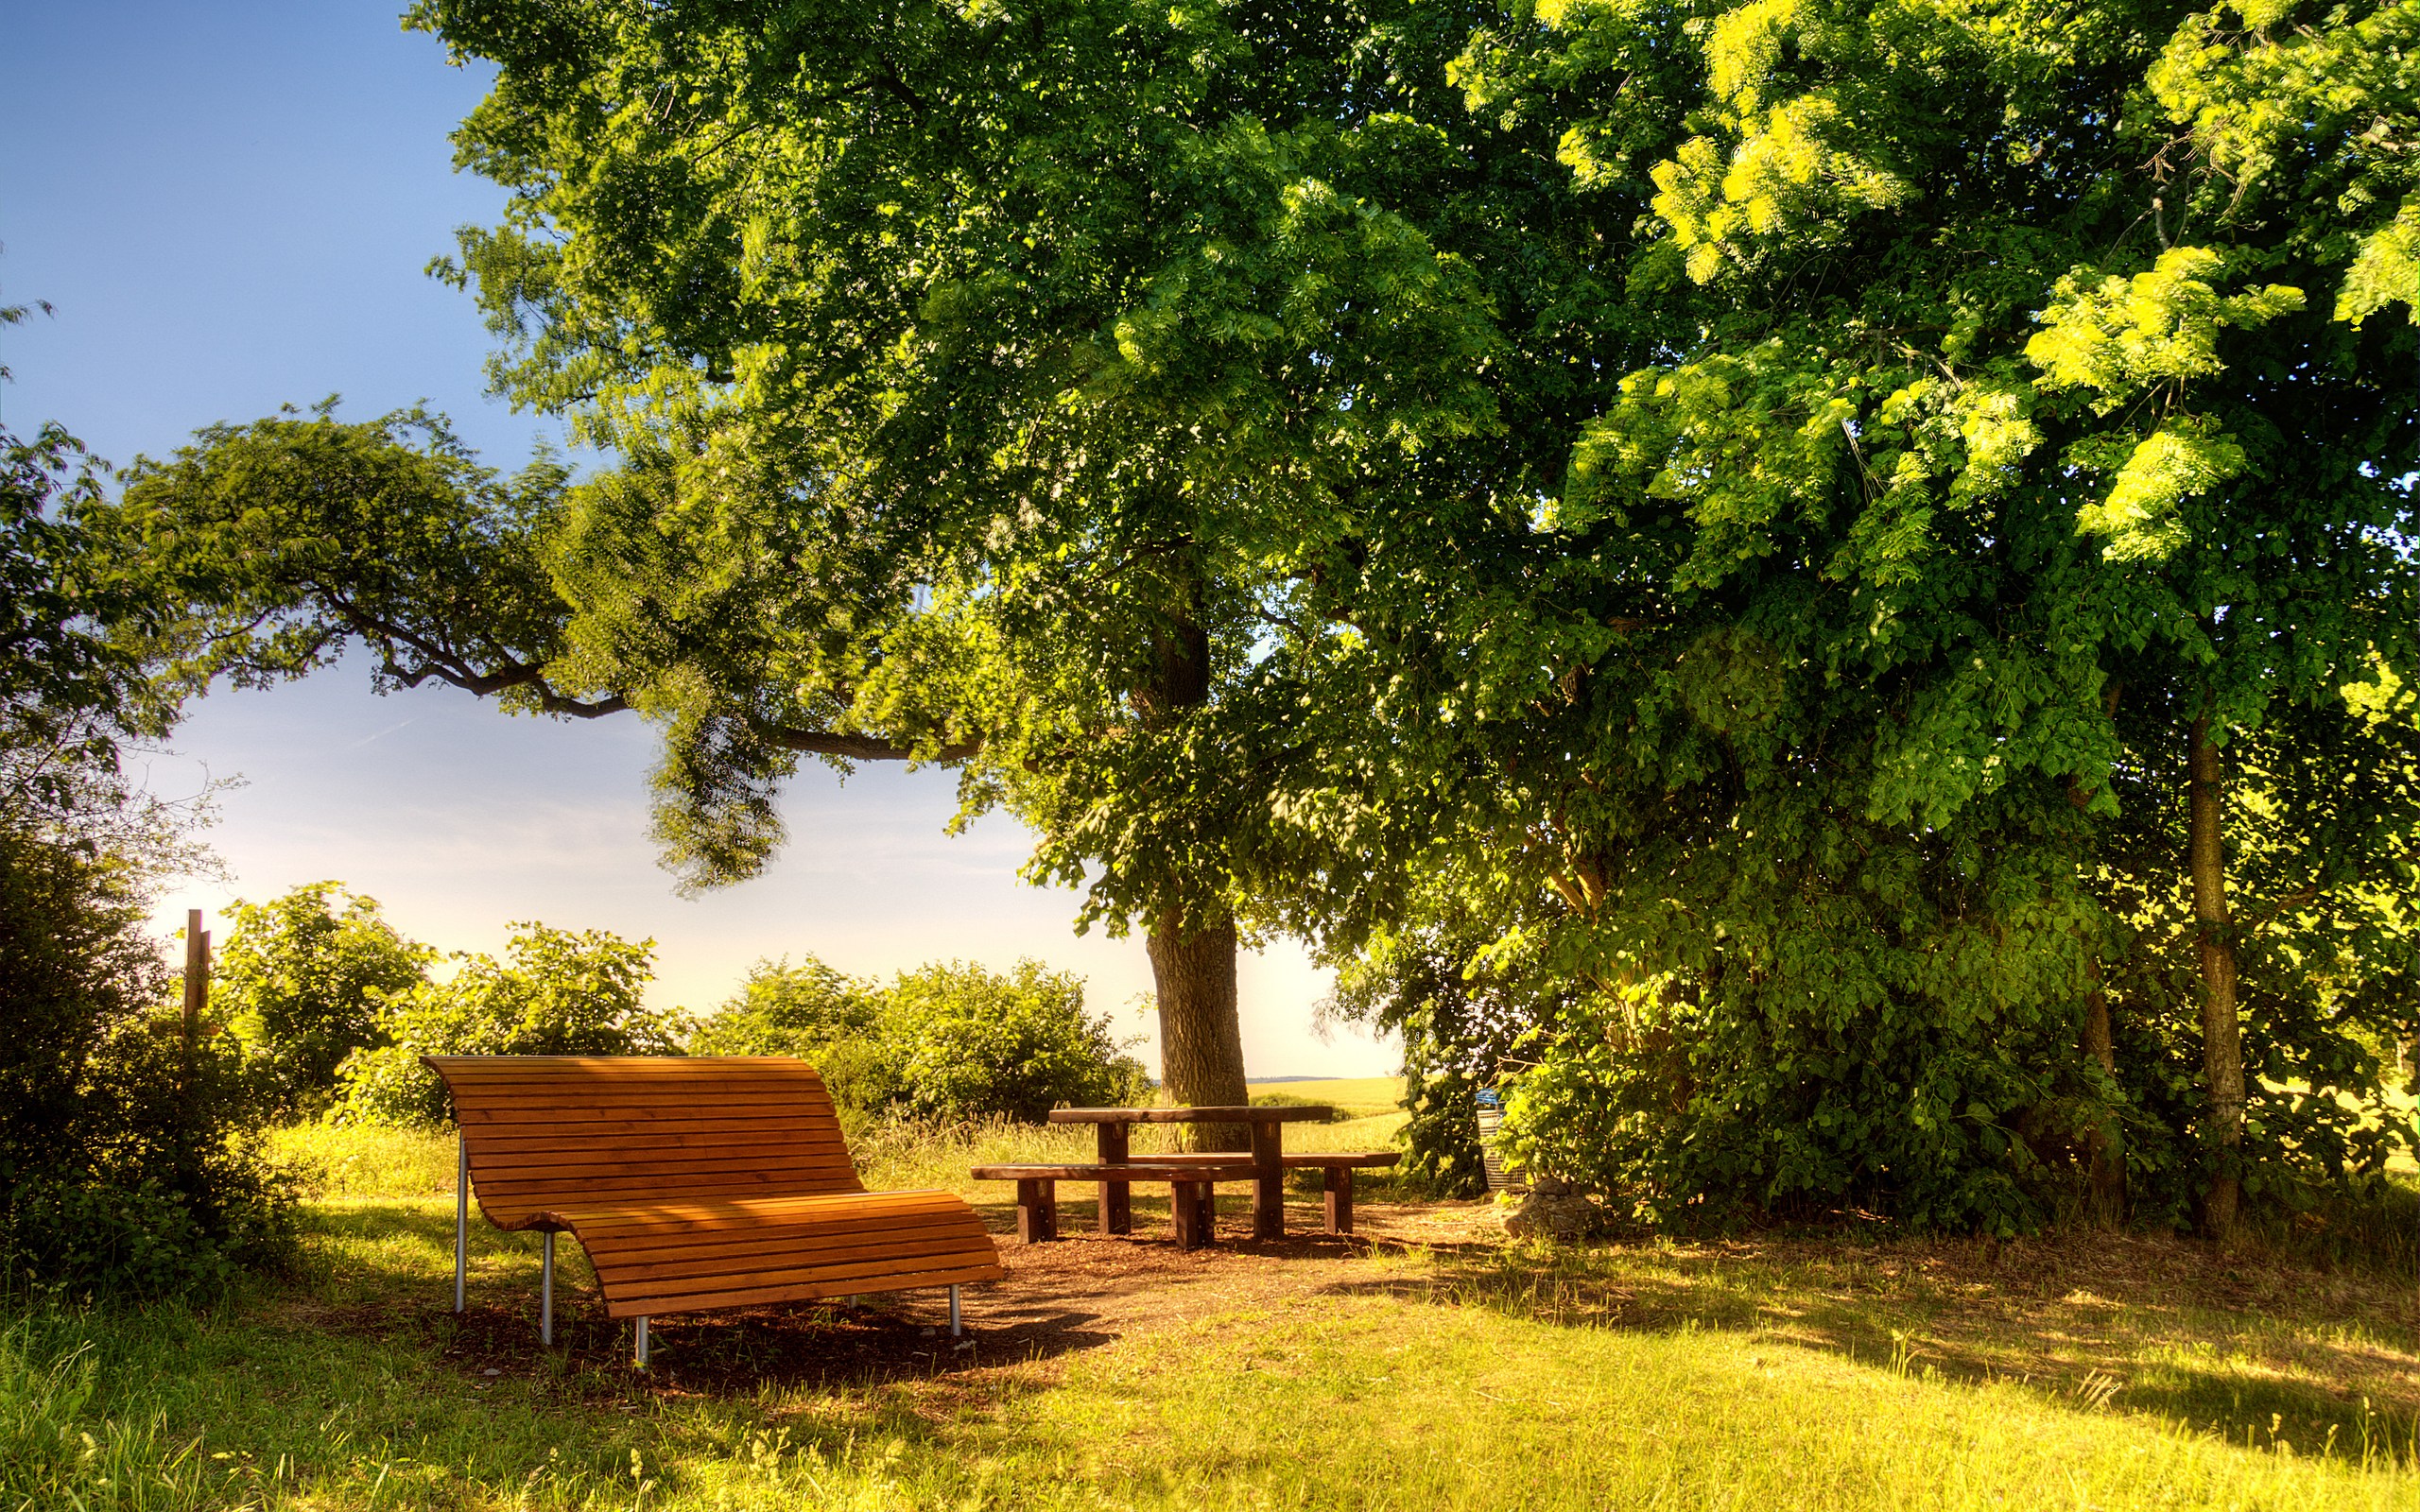 day wallpaper,nature,natural landscape,tree,bench,green